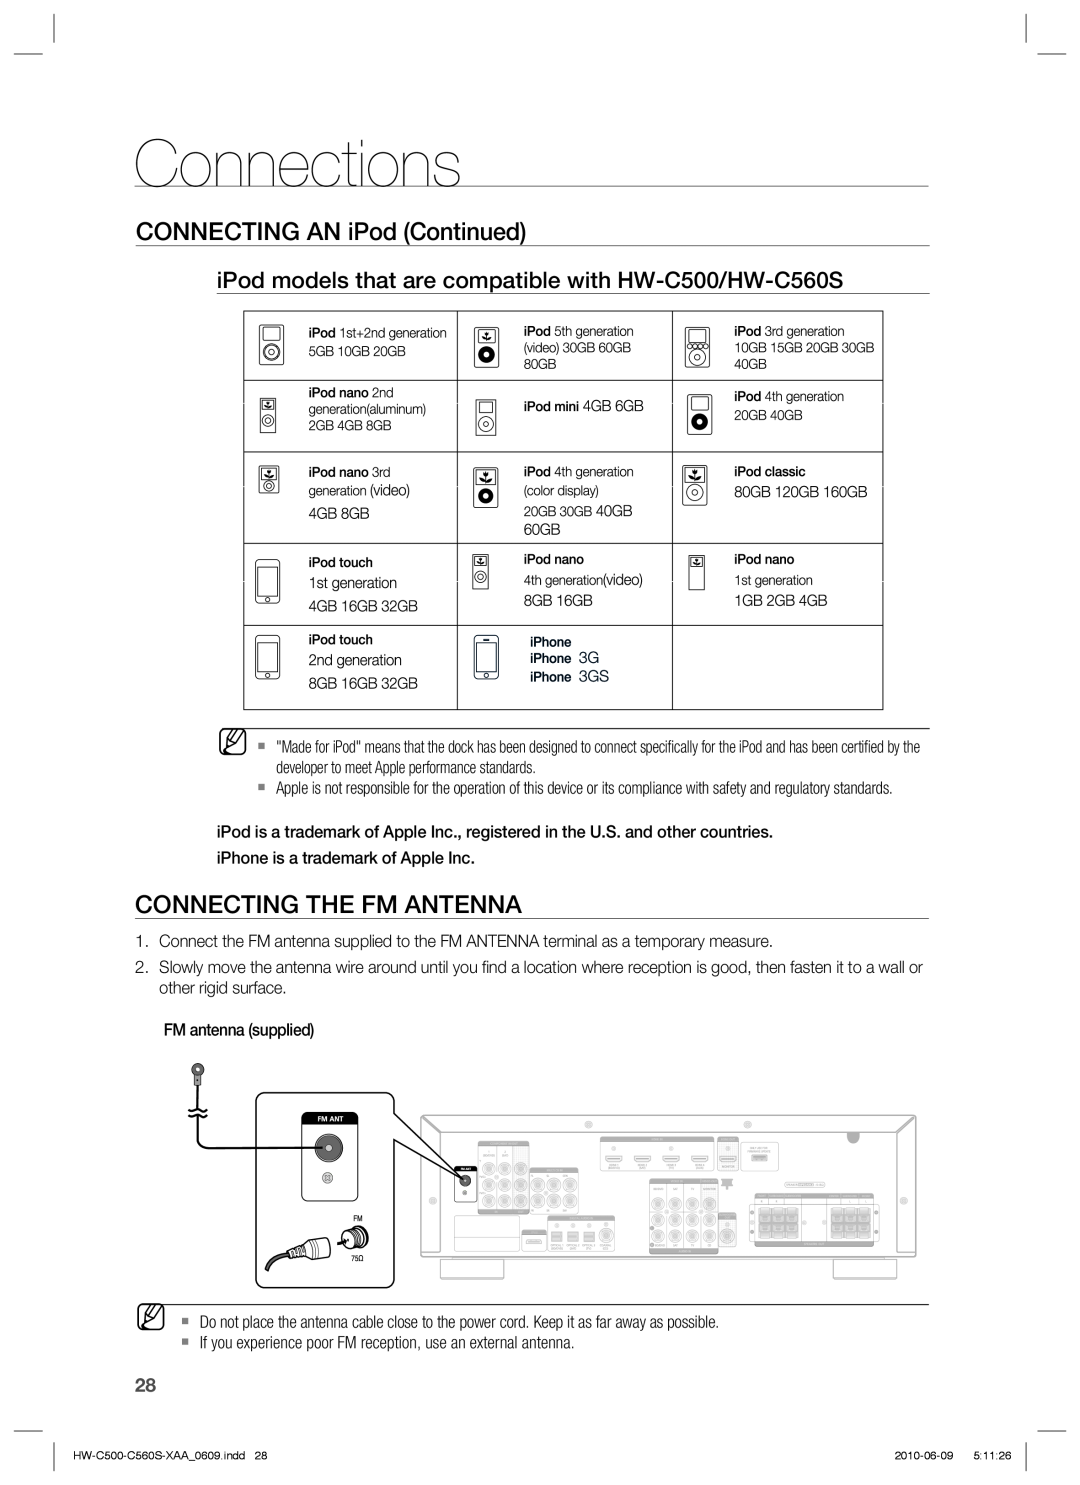 Samsung HW-C500, HW-C560S user manual CONNECTING AN iPod Continued, Connecting The Fm Antenna, Connections 